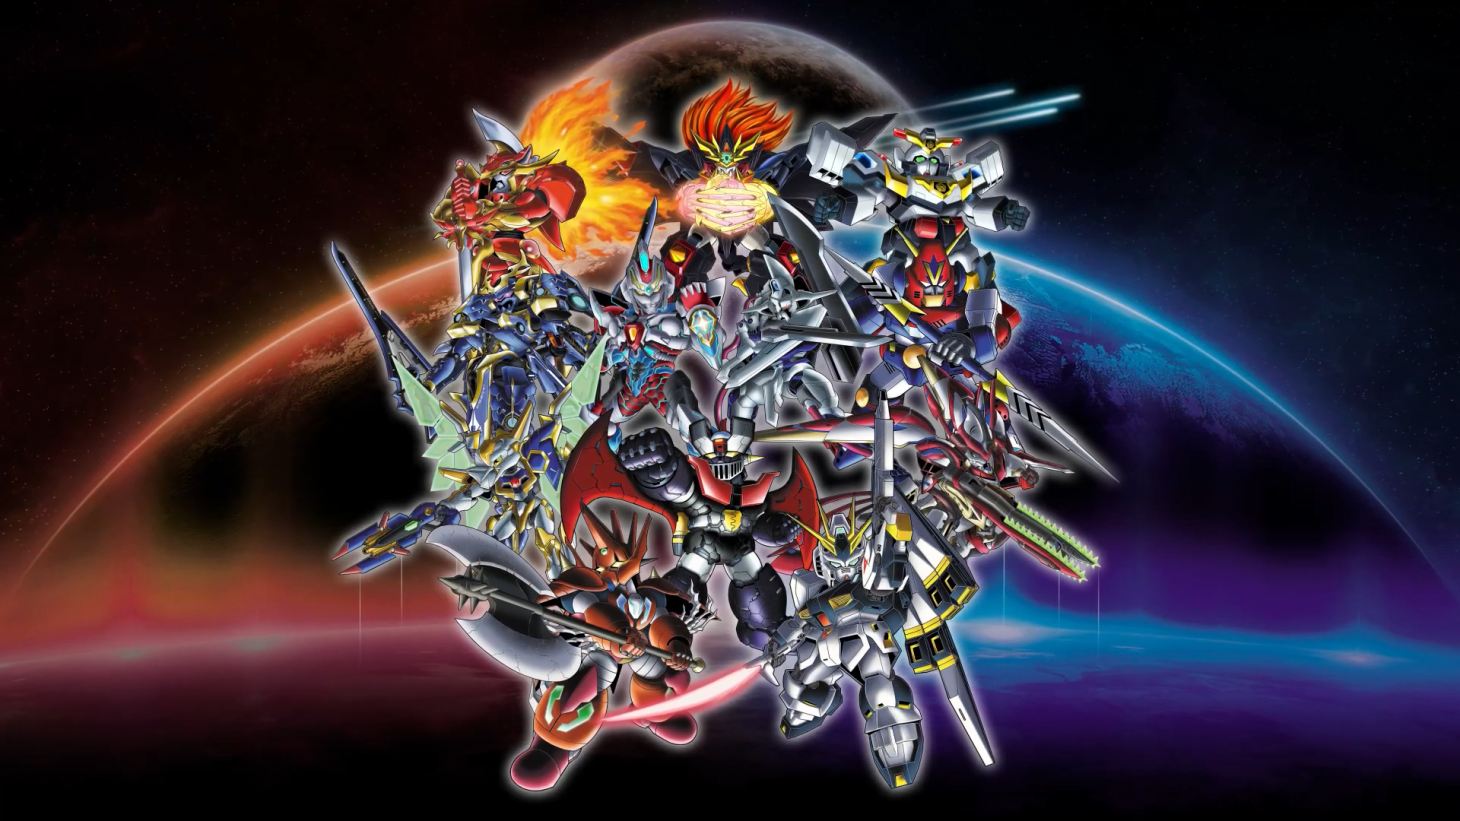 Bandai Reveals Classic Gundams And Other Famous Mecha For Super Robot 30 - Game Informer